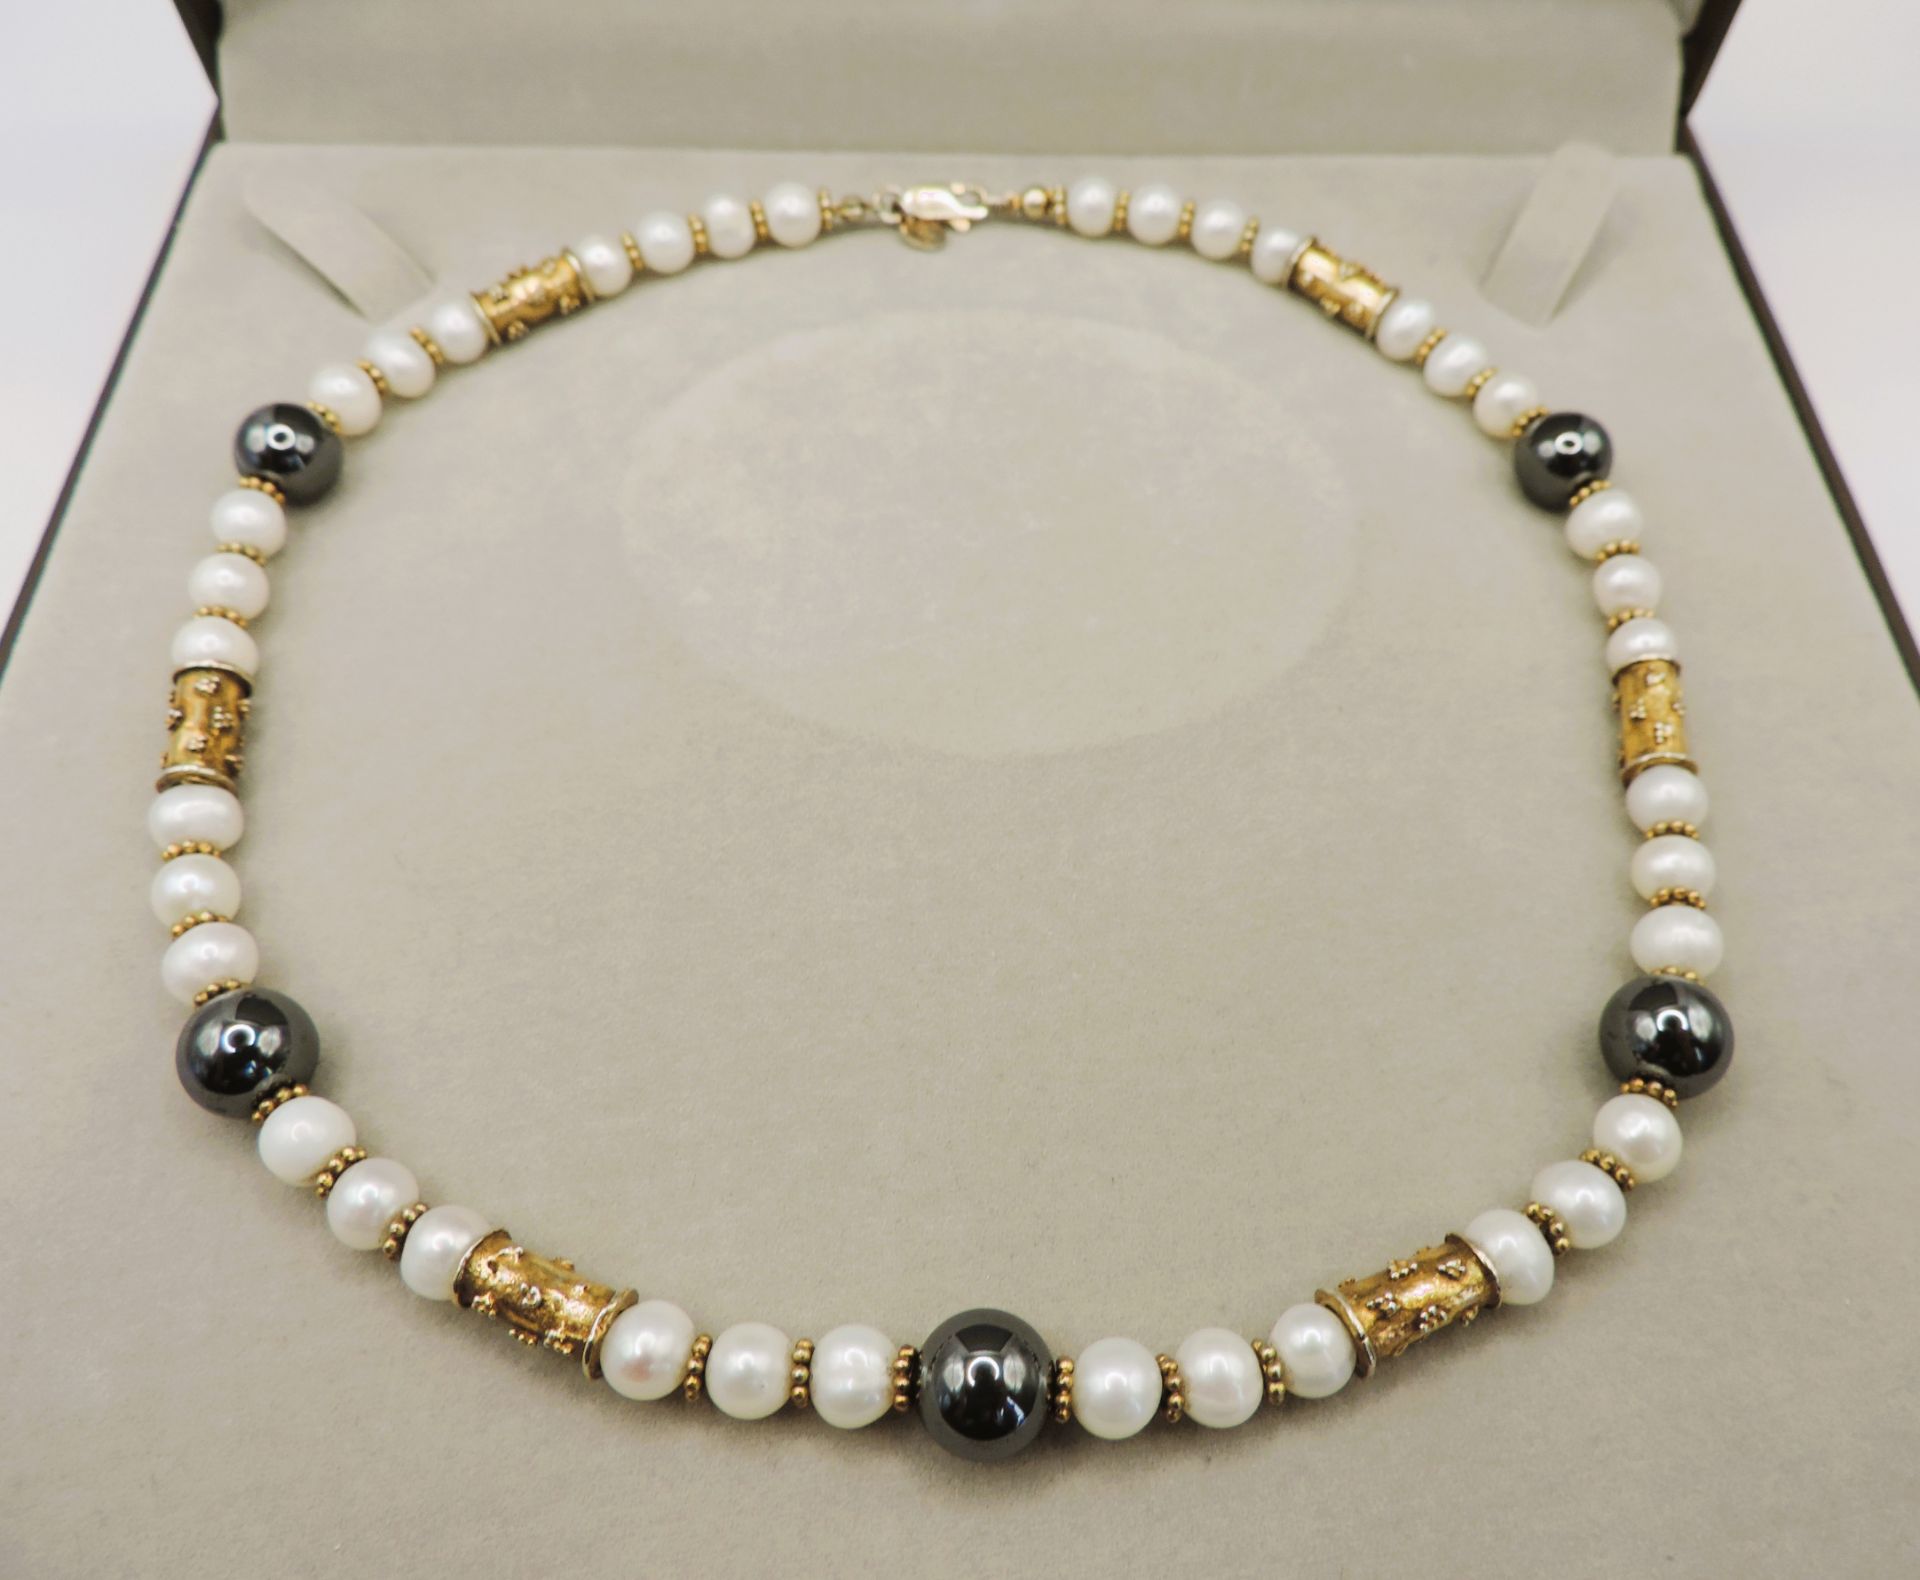 Gold on Silver Cultured Pearl & Bead Necklace with Gift Box - Image 2 of 7